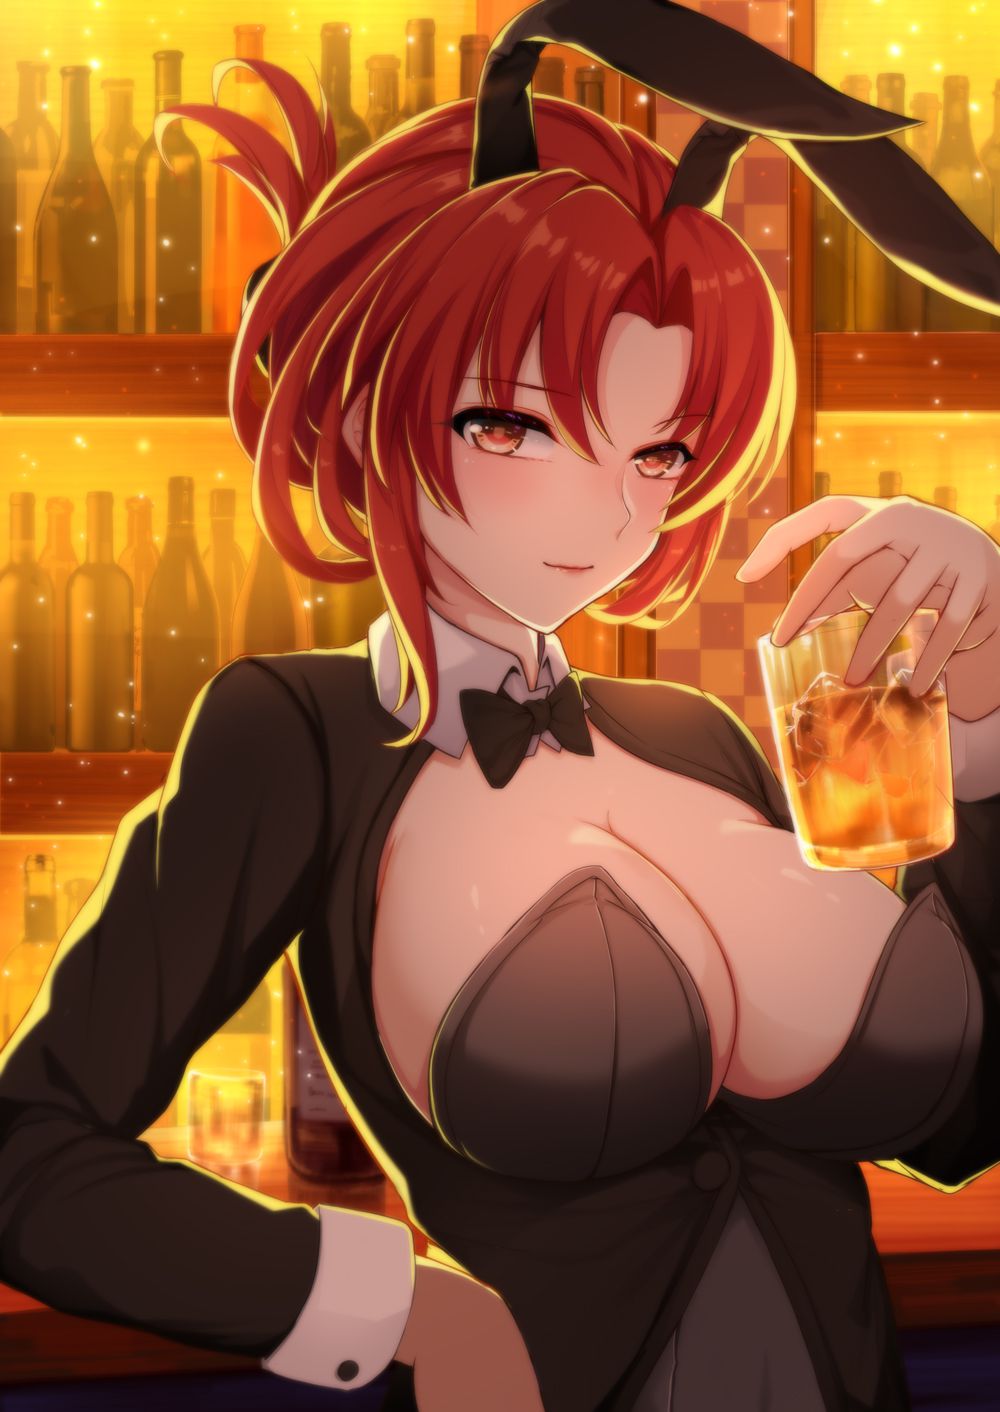 【Erotic Anime Summary】 Valley erotic images of busty beauties 【50 photos】 36